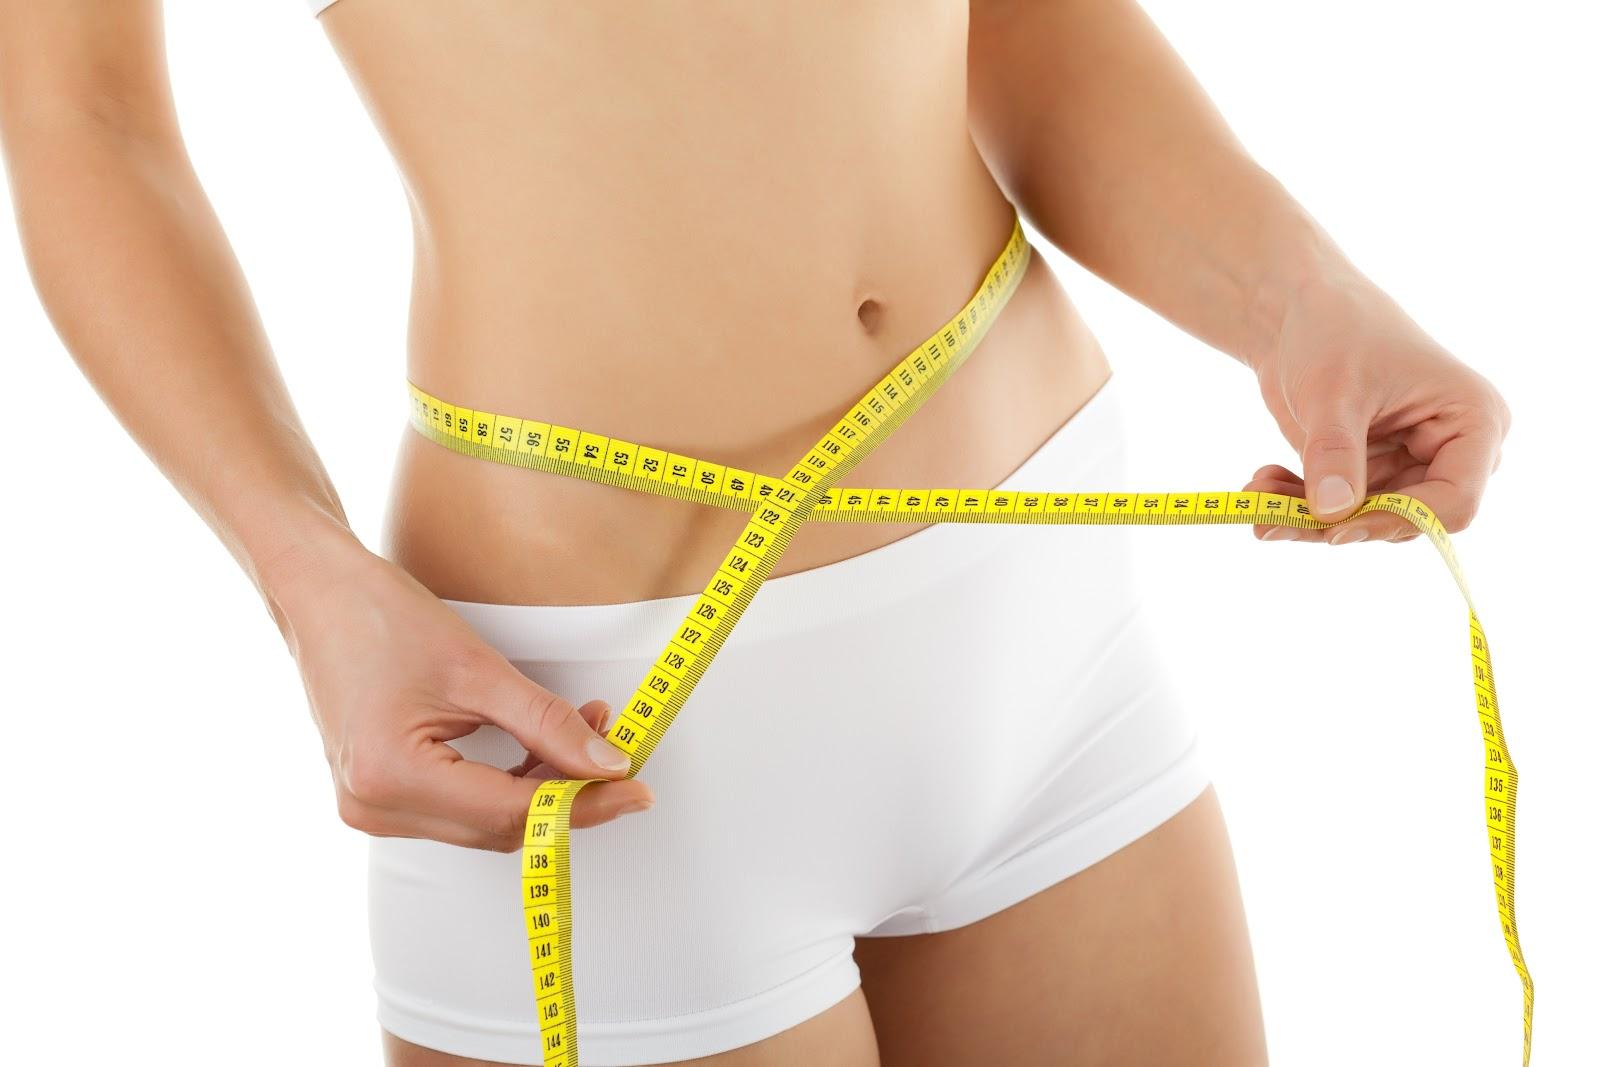 How to Lose Weight With the Help of Diet Supplements Cheaply